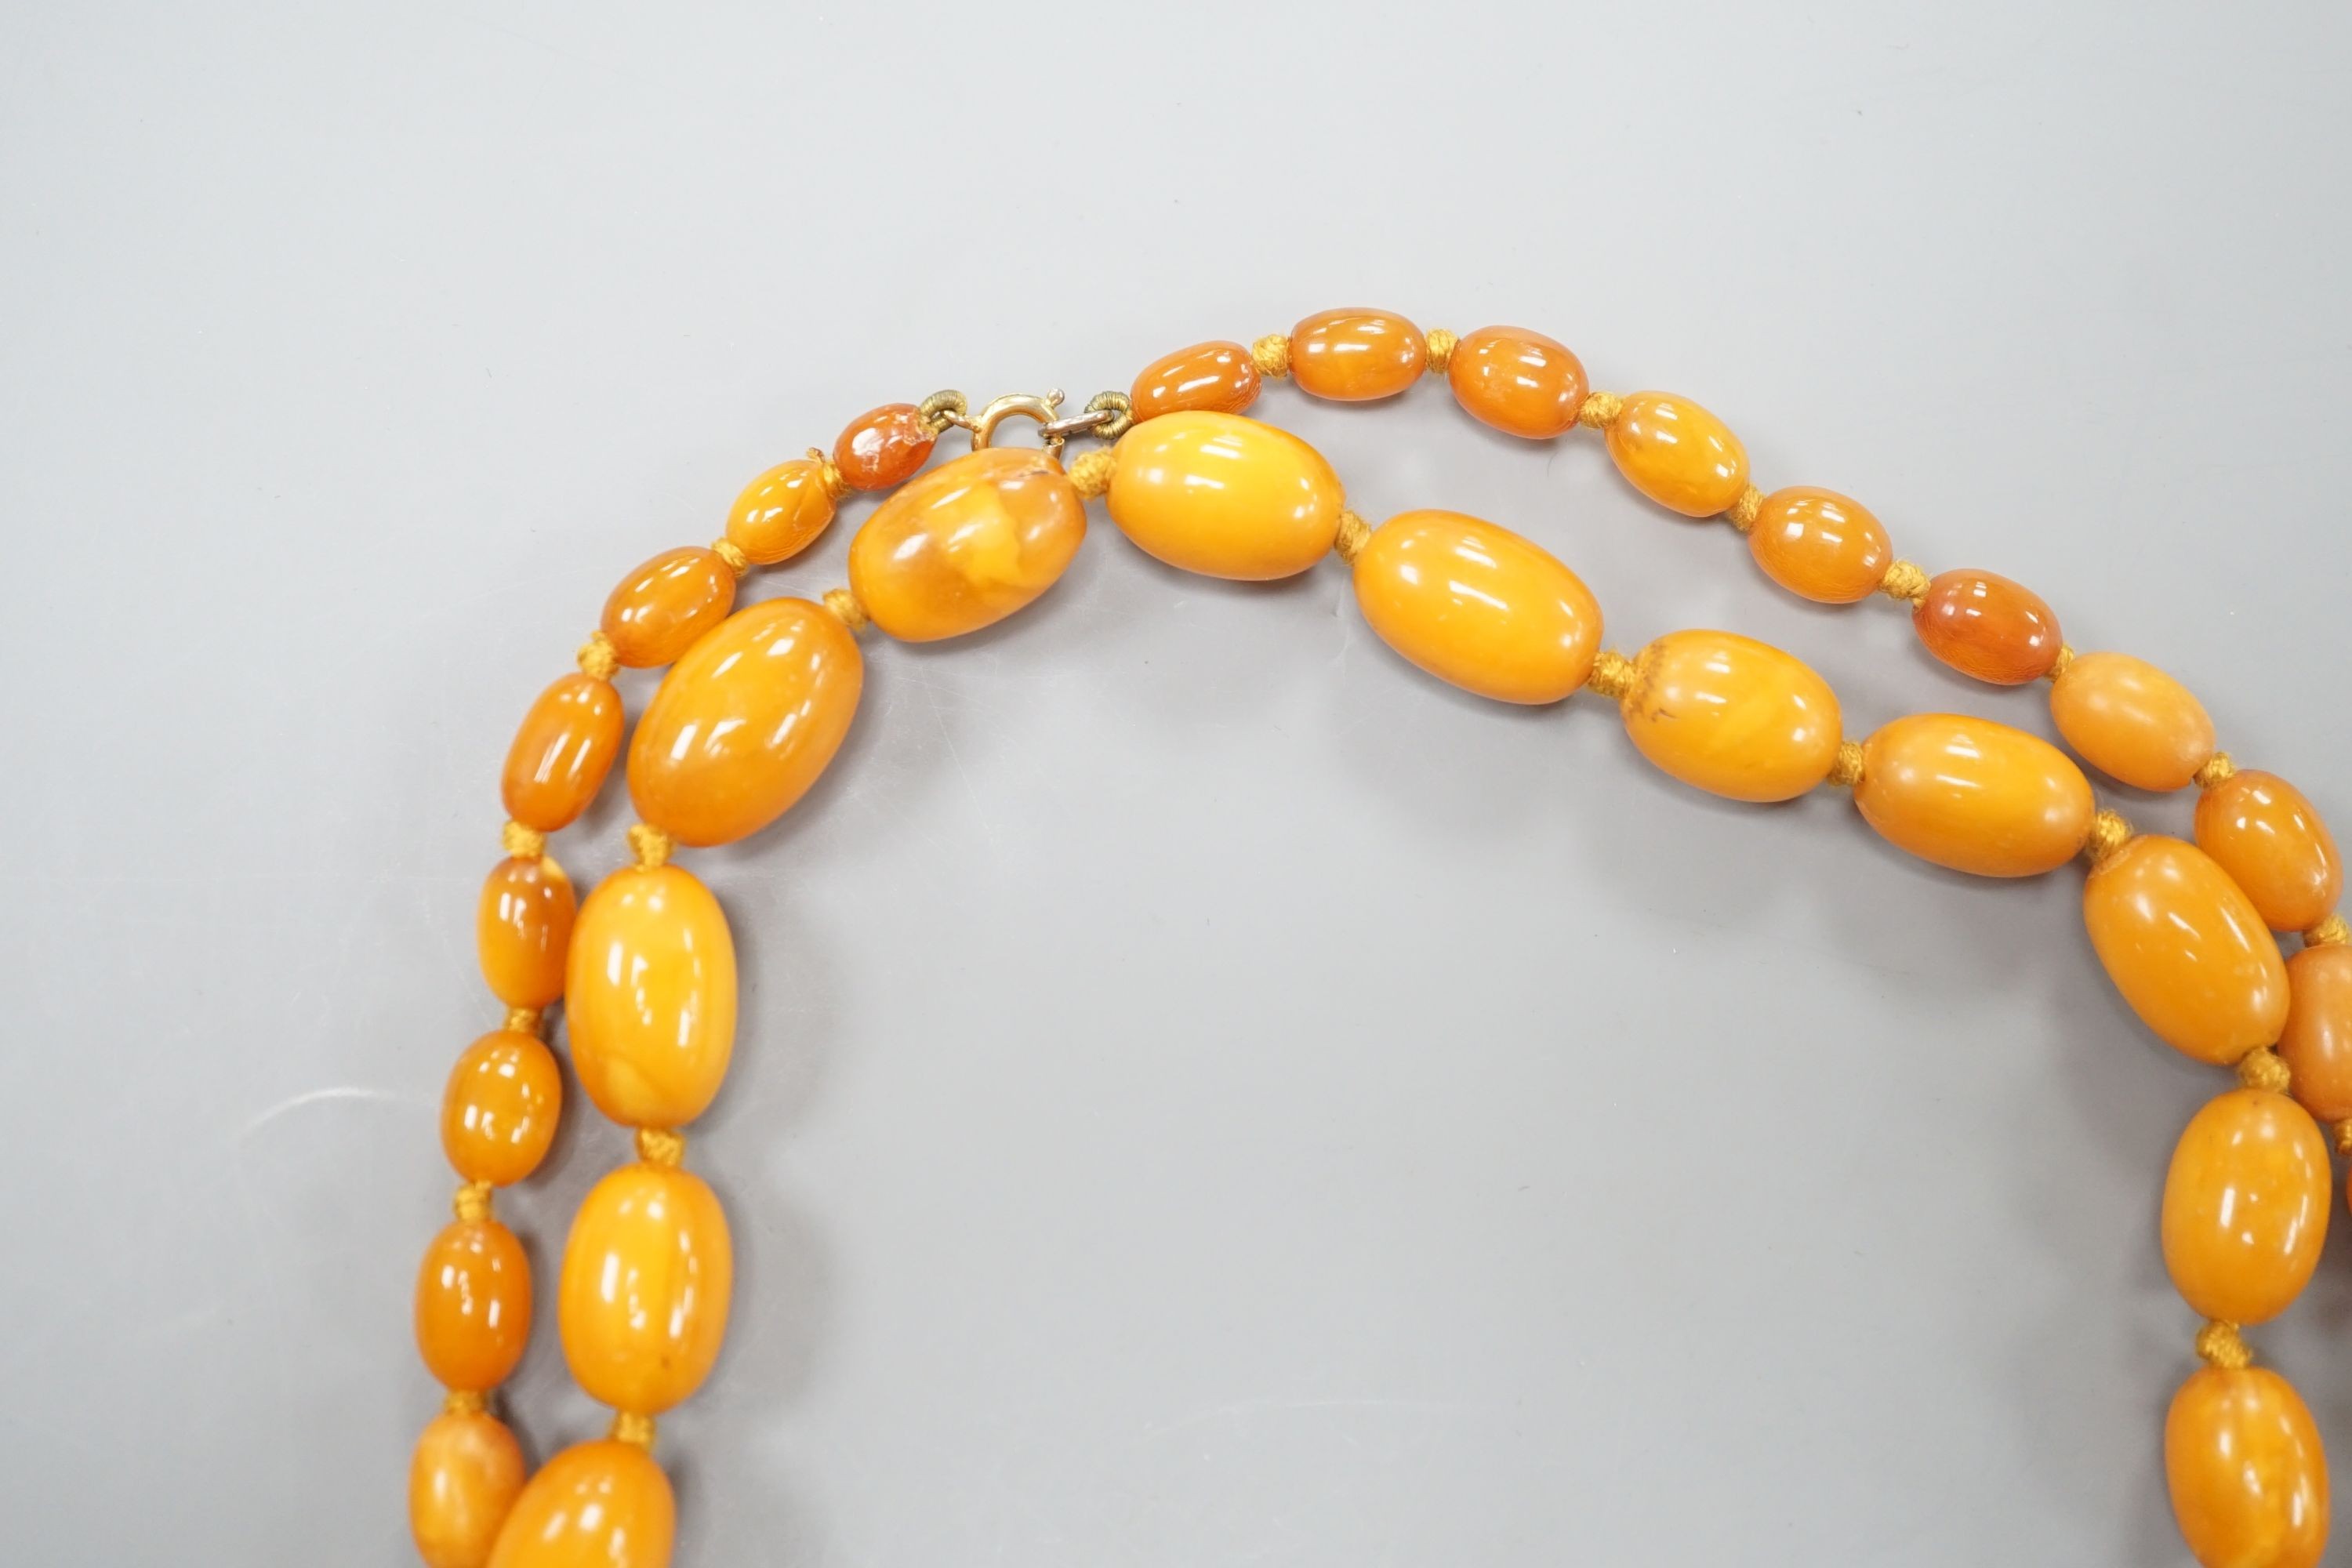 A single strand graduated oval amber bead necklace, 88cm, gross weight 50 grams.